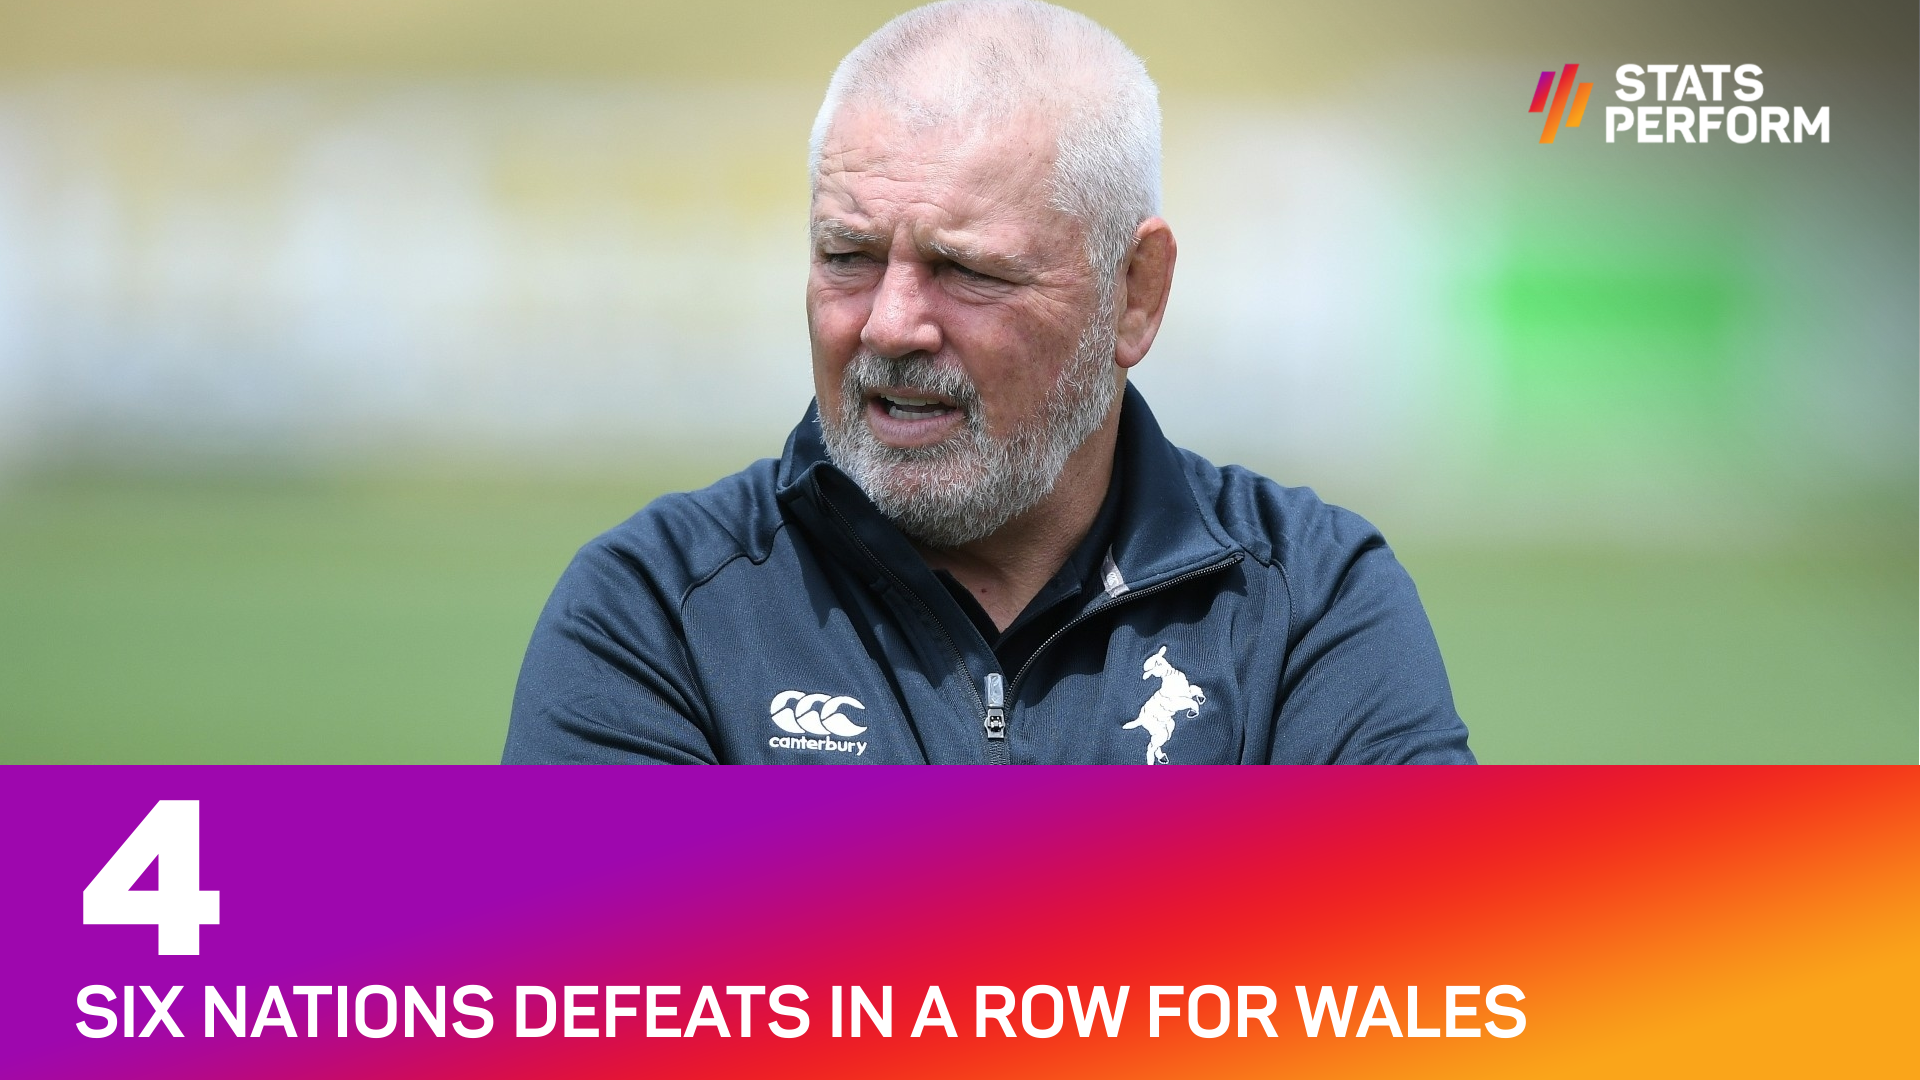 Wales have lost four Six Nations games in a row